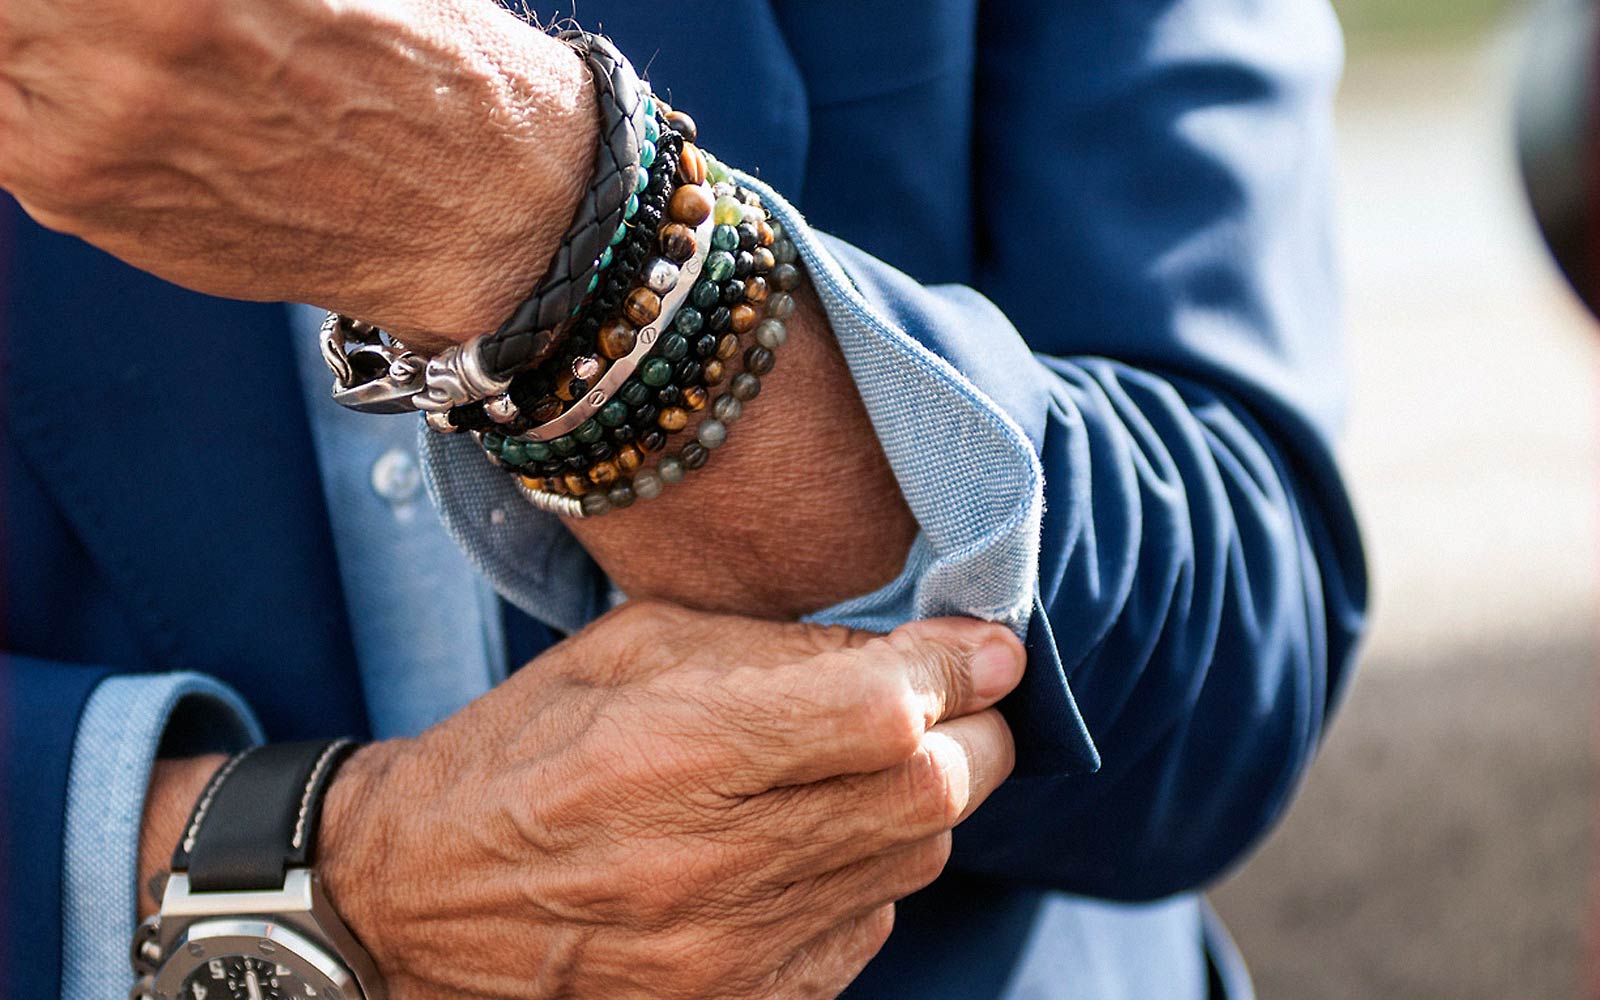 Your Guide to Men's Jewelry - The GentleManual